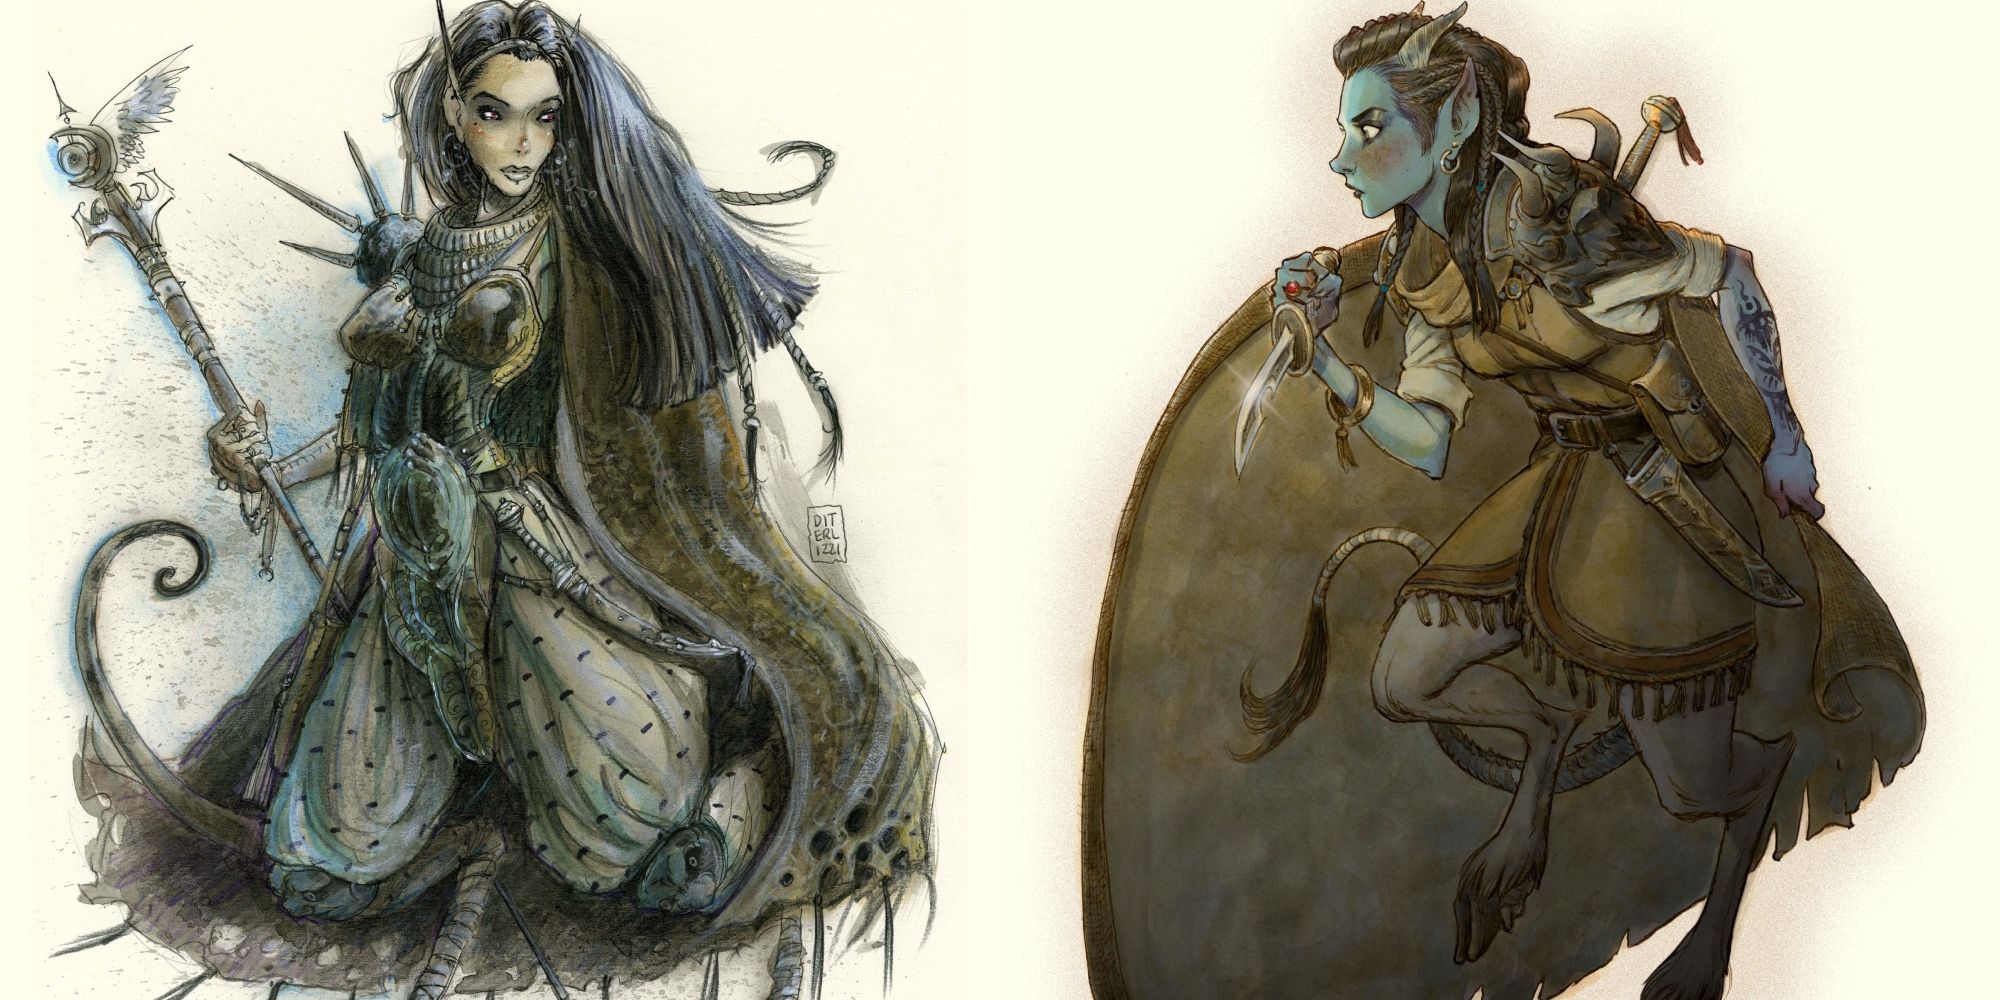 1994 and 2023 versions of teiflings for DnD Planescape